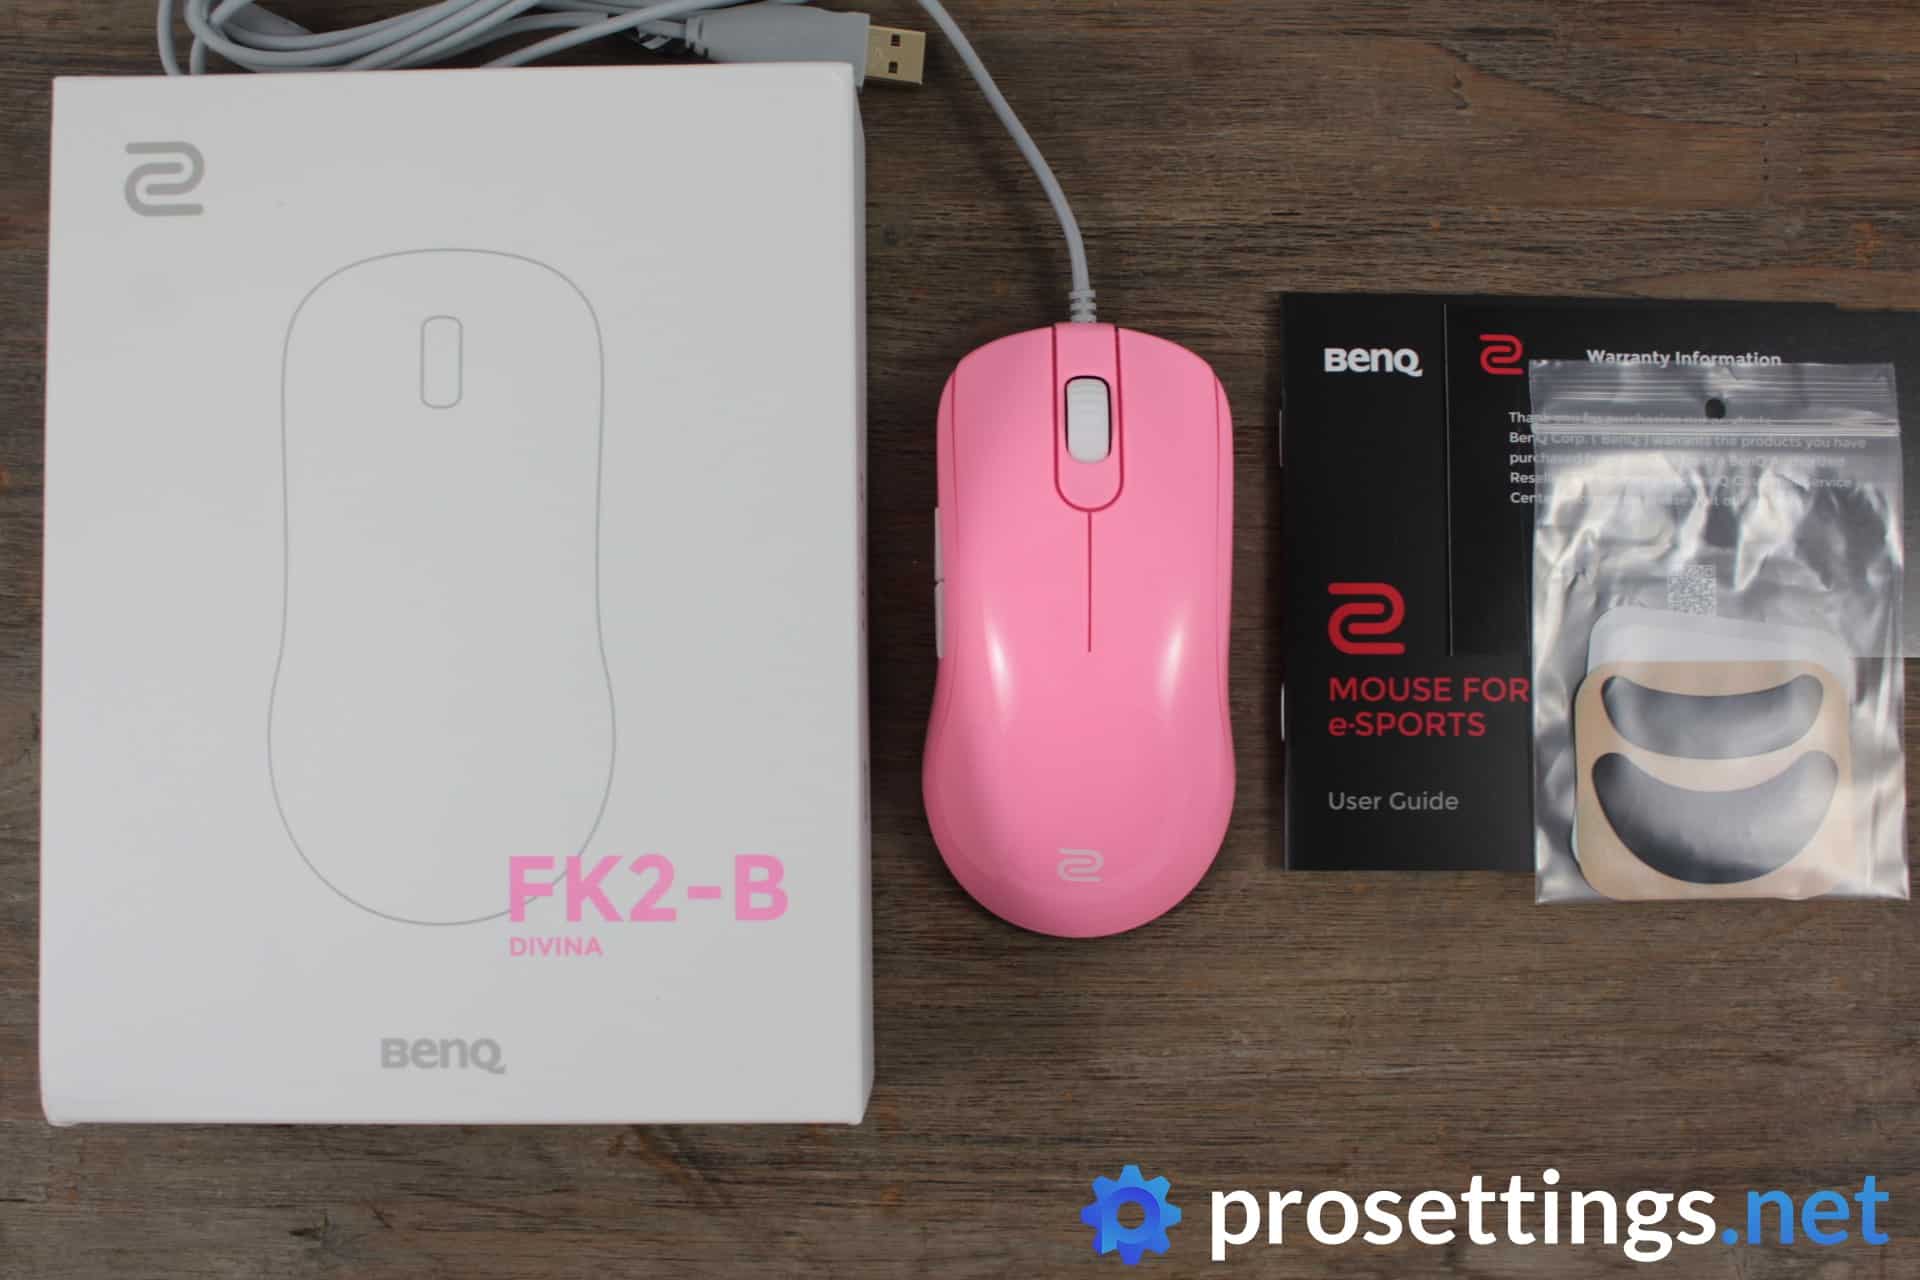 Zowie  FK2-B Divina Mouse Review Packaging